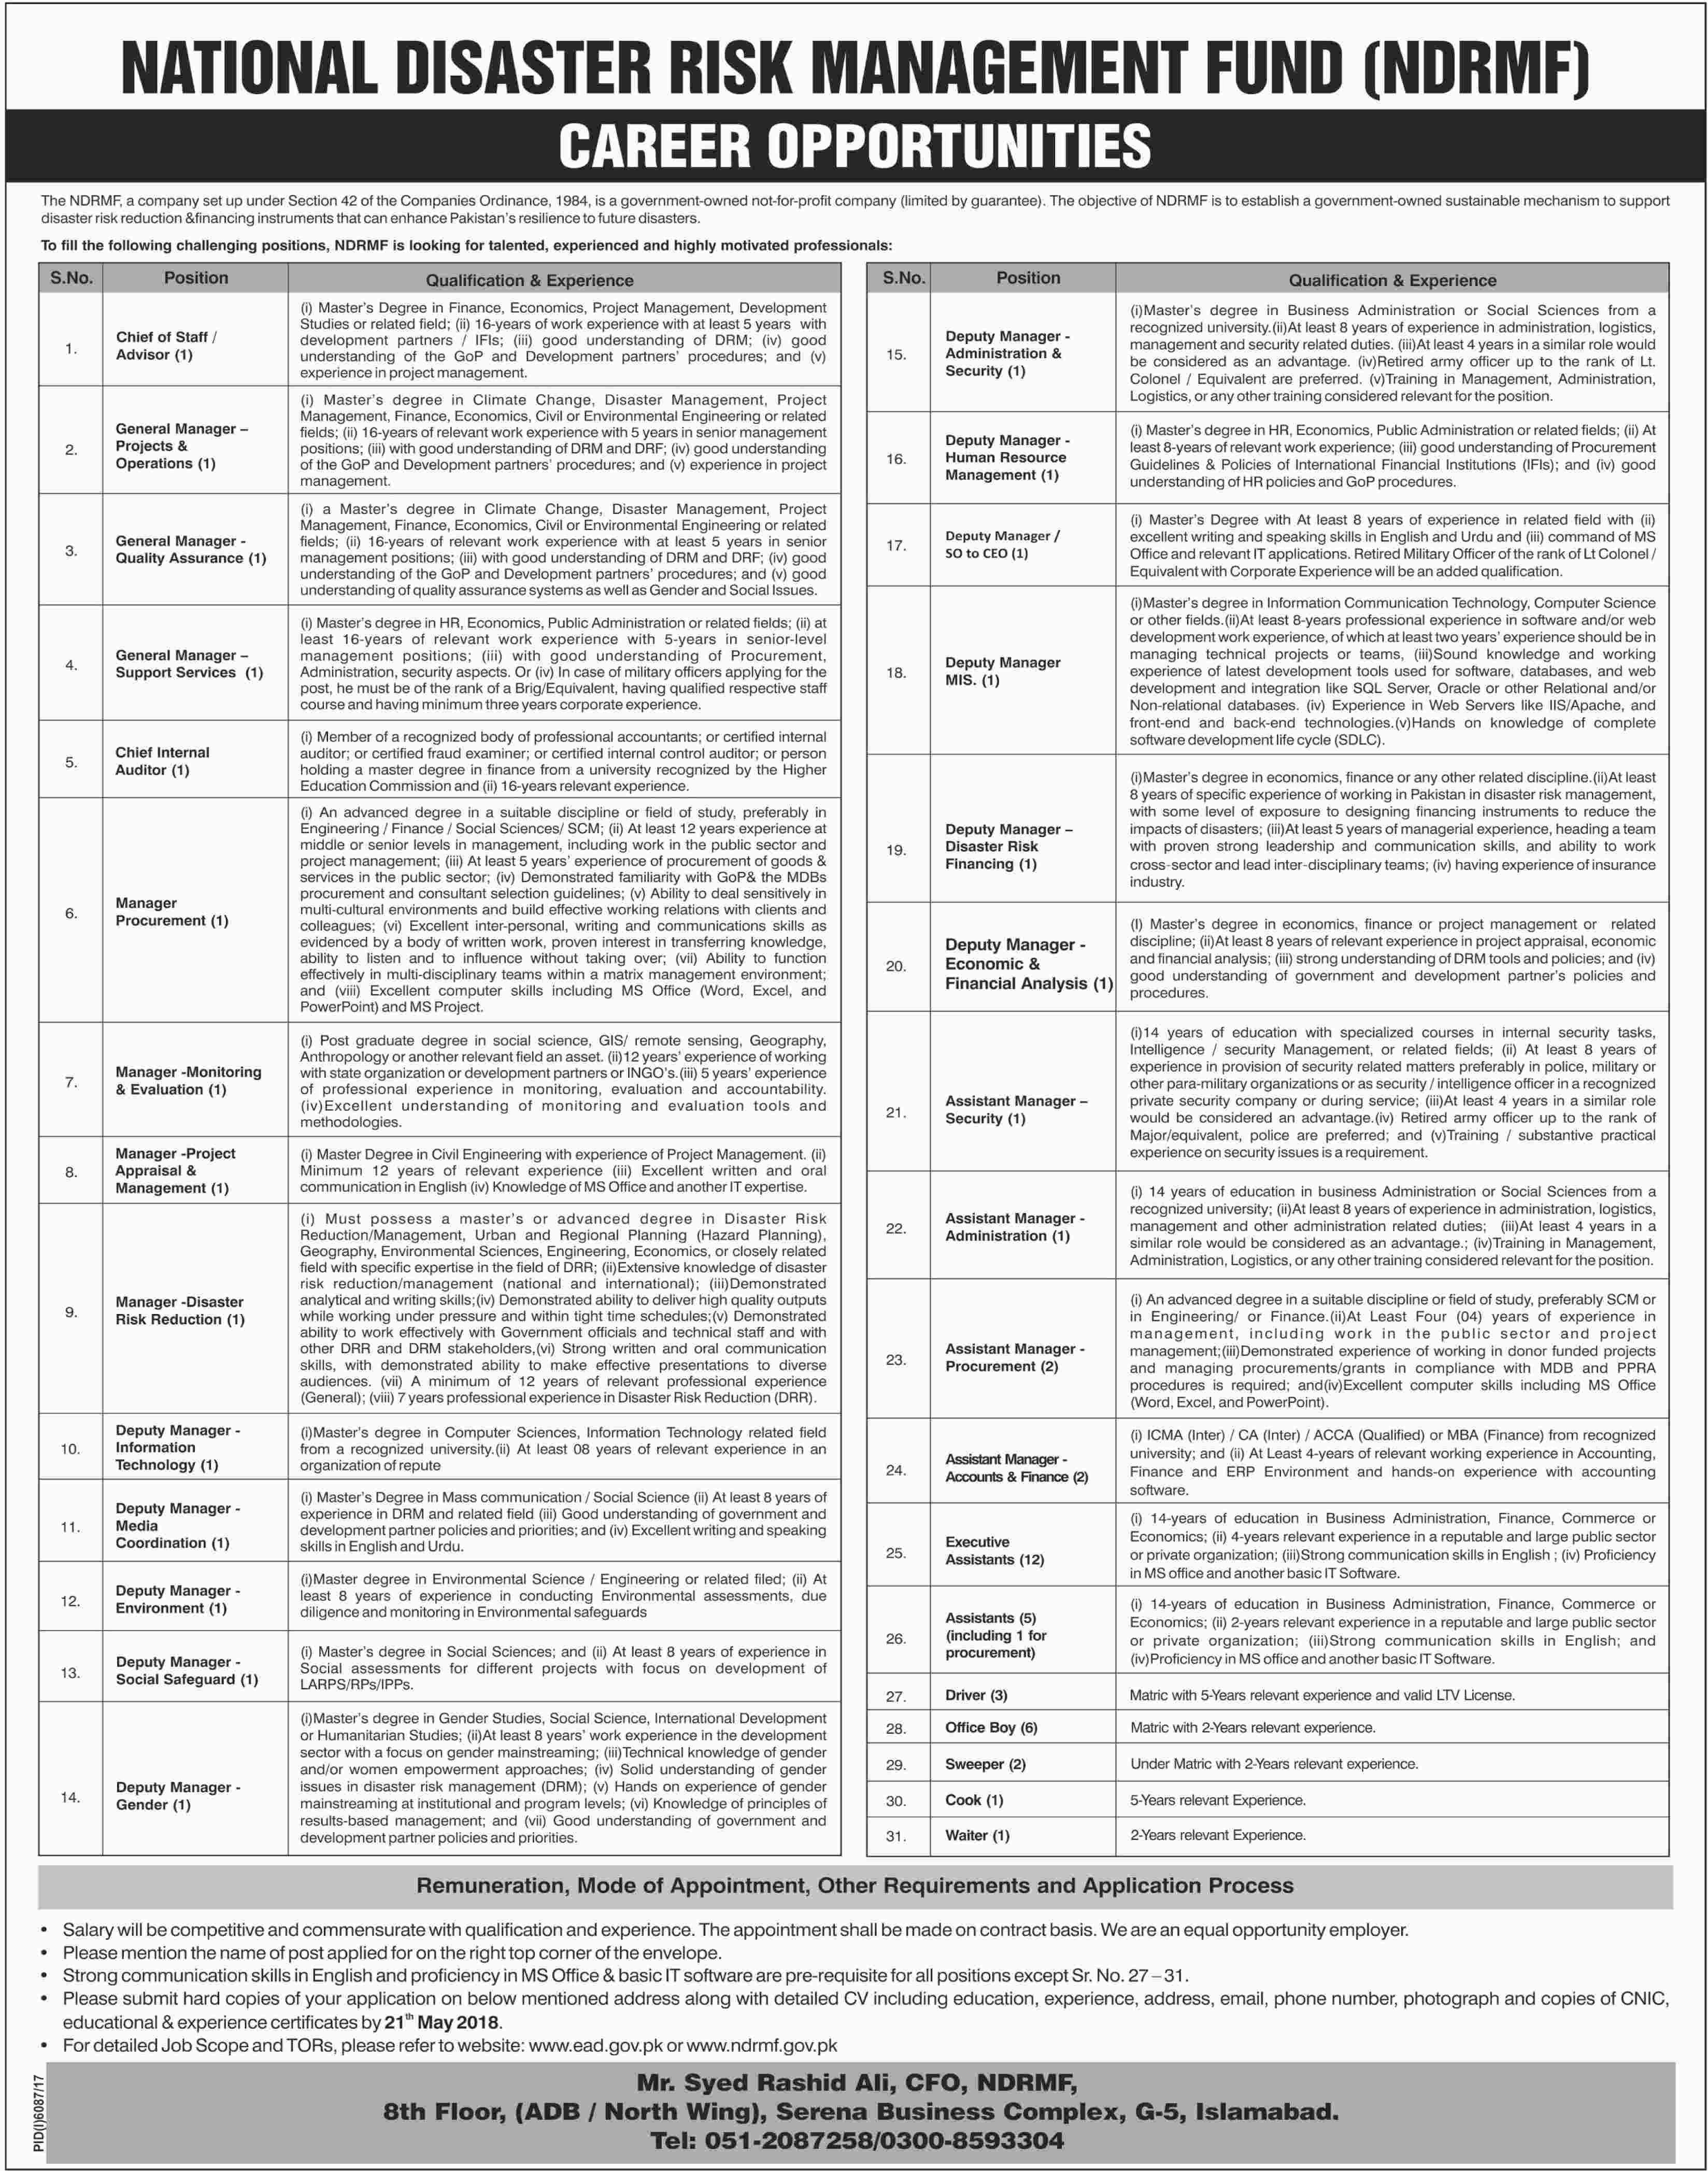 Jobs in National Disaster Risk Management Fund 05 May 2018